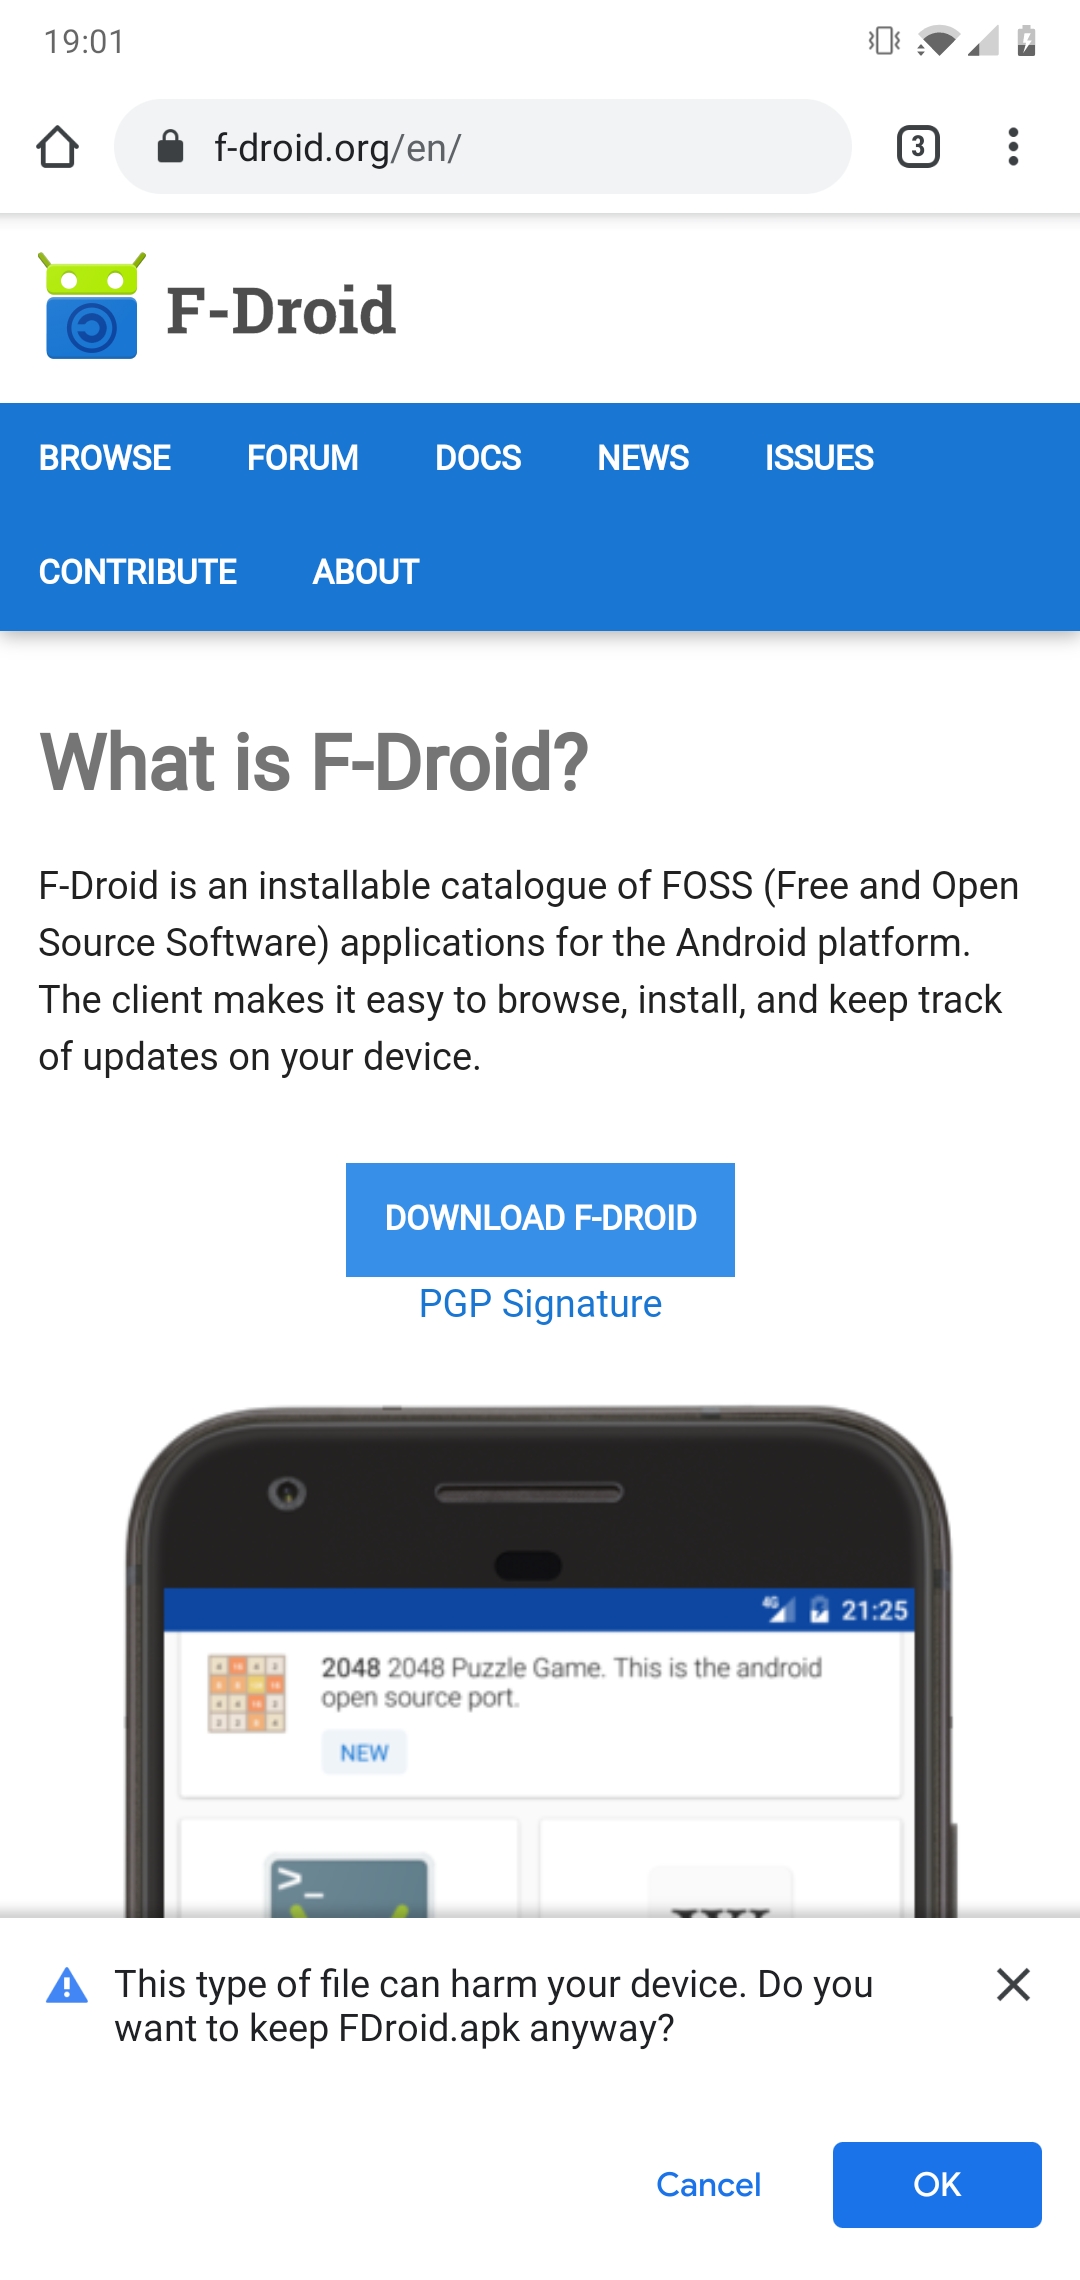 Download F-Droid from their website